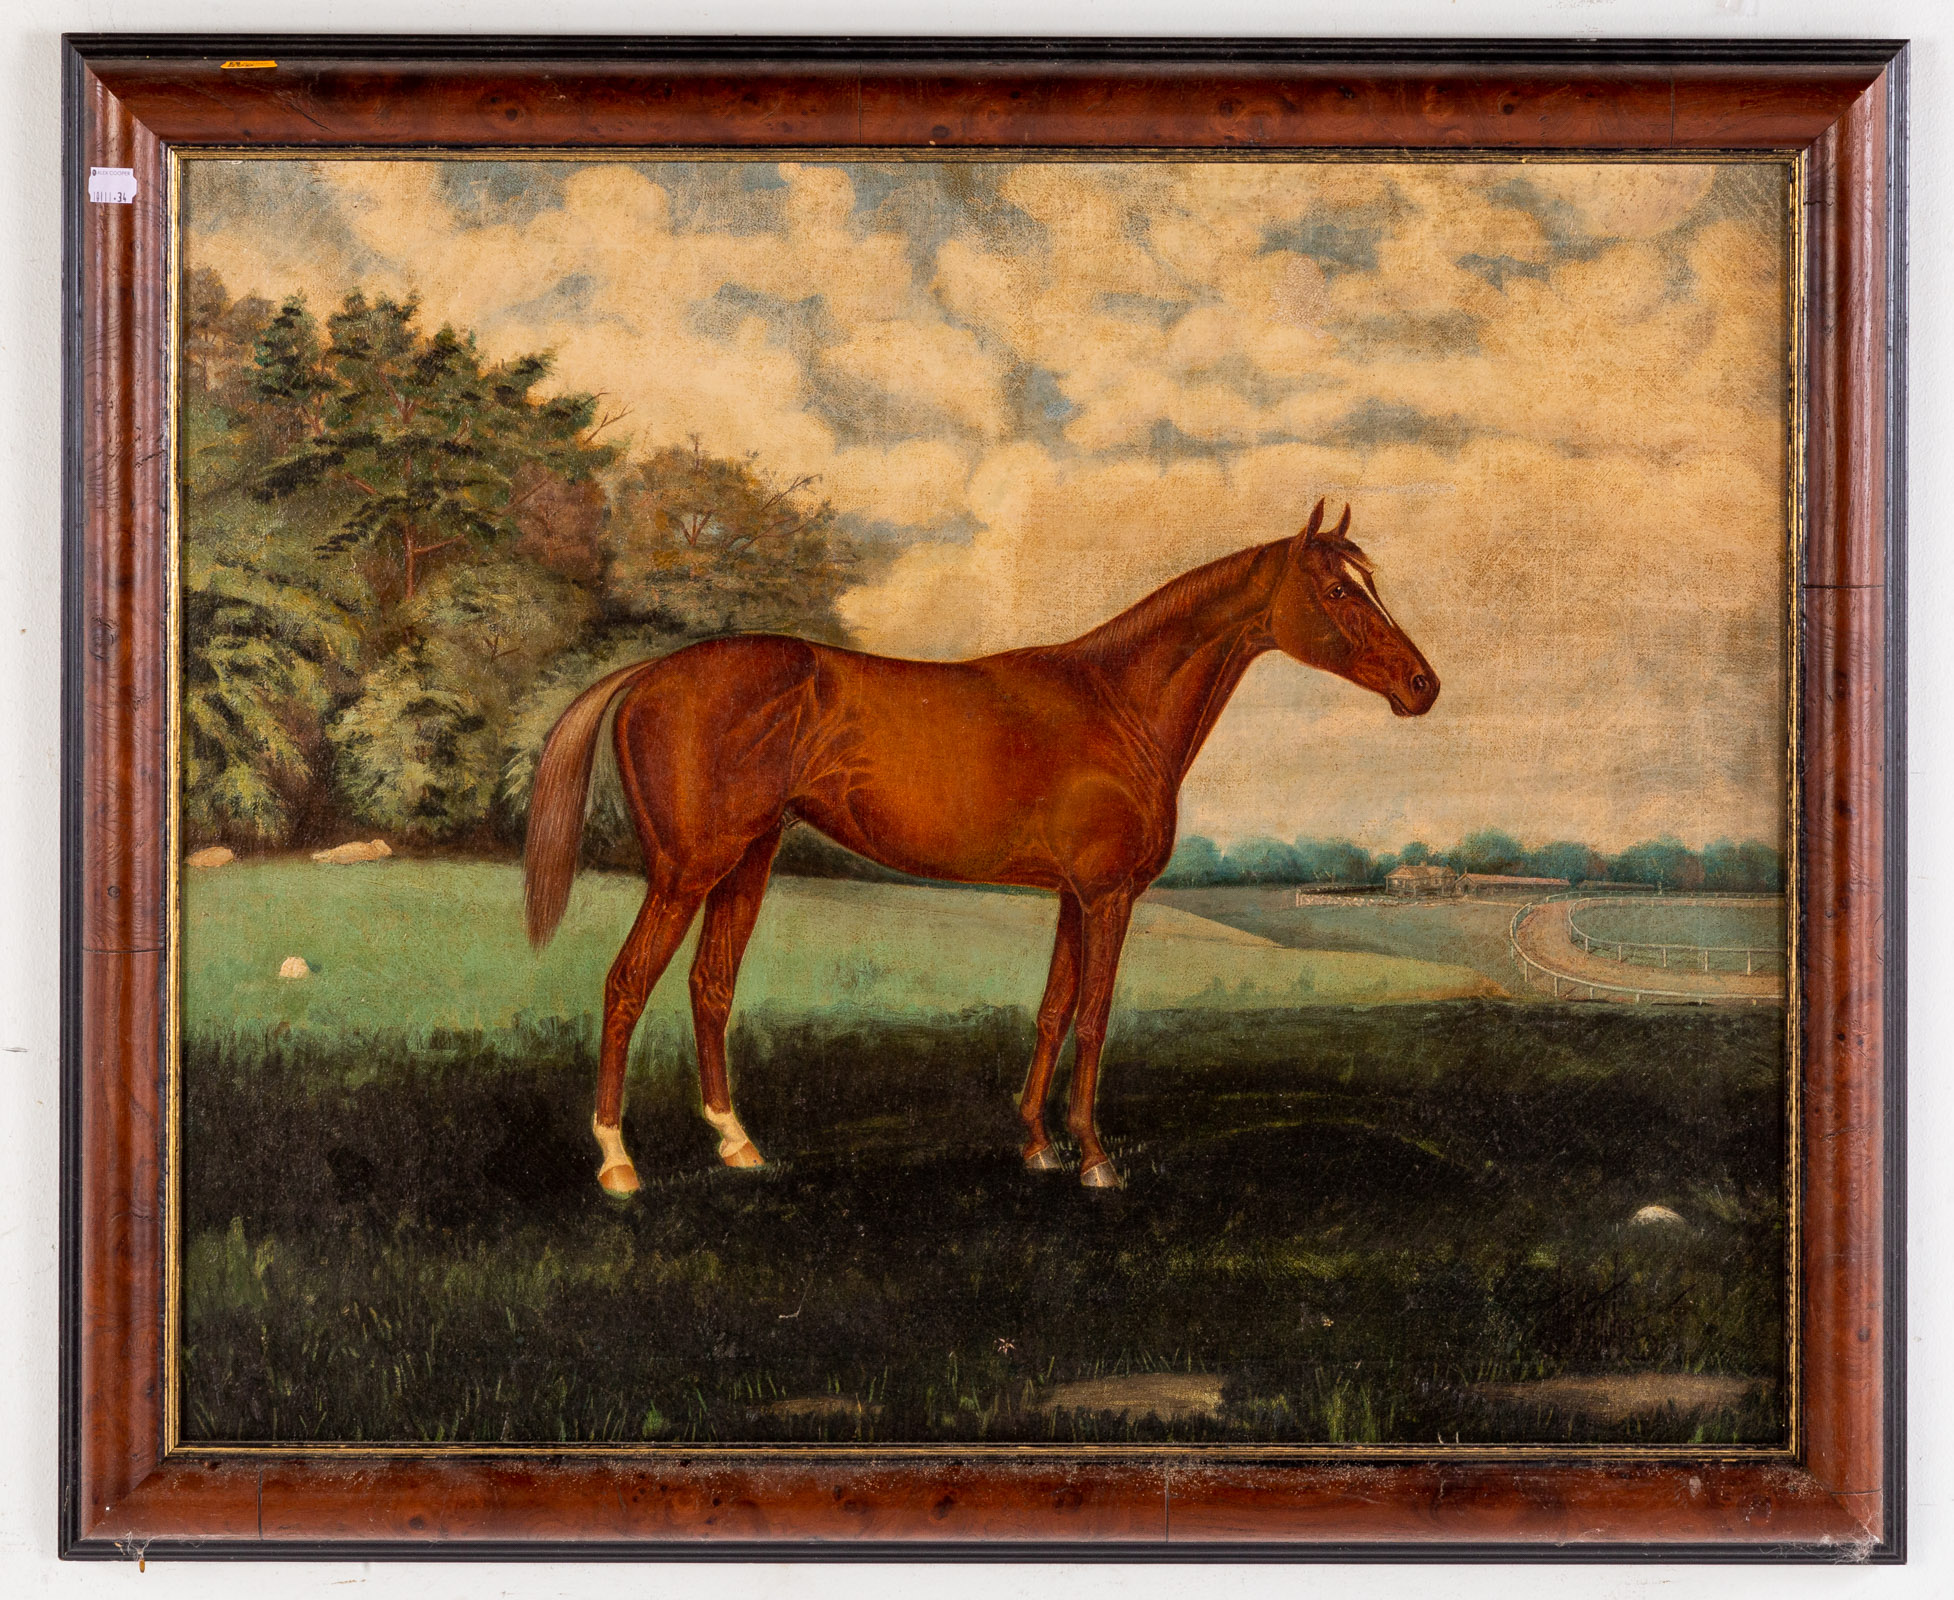 ARTIST UNKNOWN. PAINTING OF A HORSE,